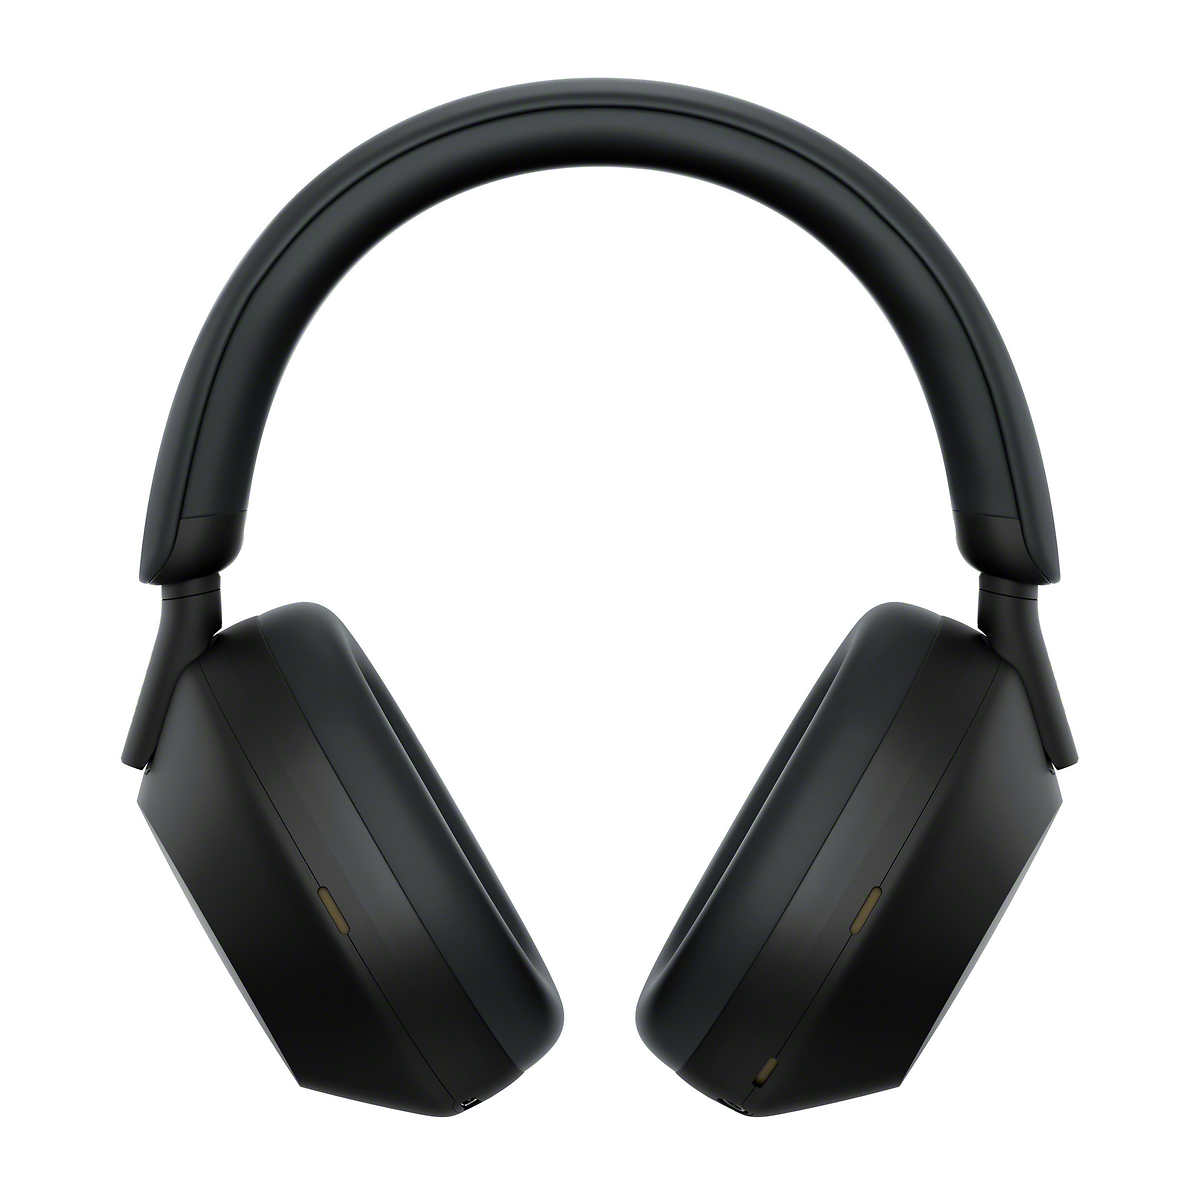 Costco: Sony WH1000XM5 Wireless Noise-Canceling Over-the-Ear Headphones - Black Includes $30 Apple credit $329.99